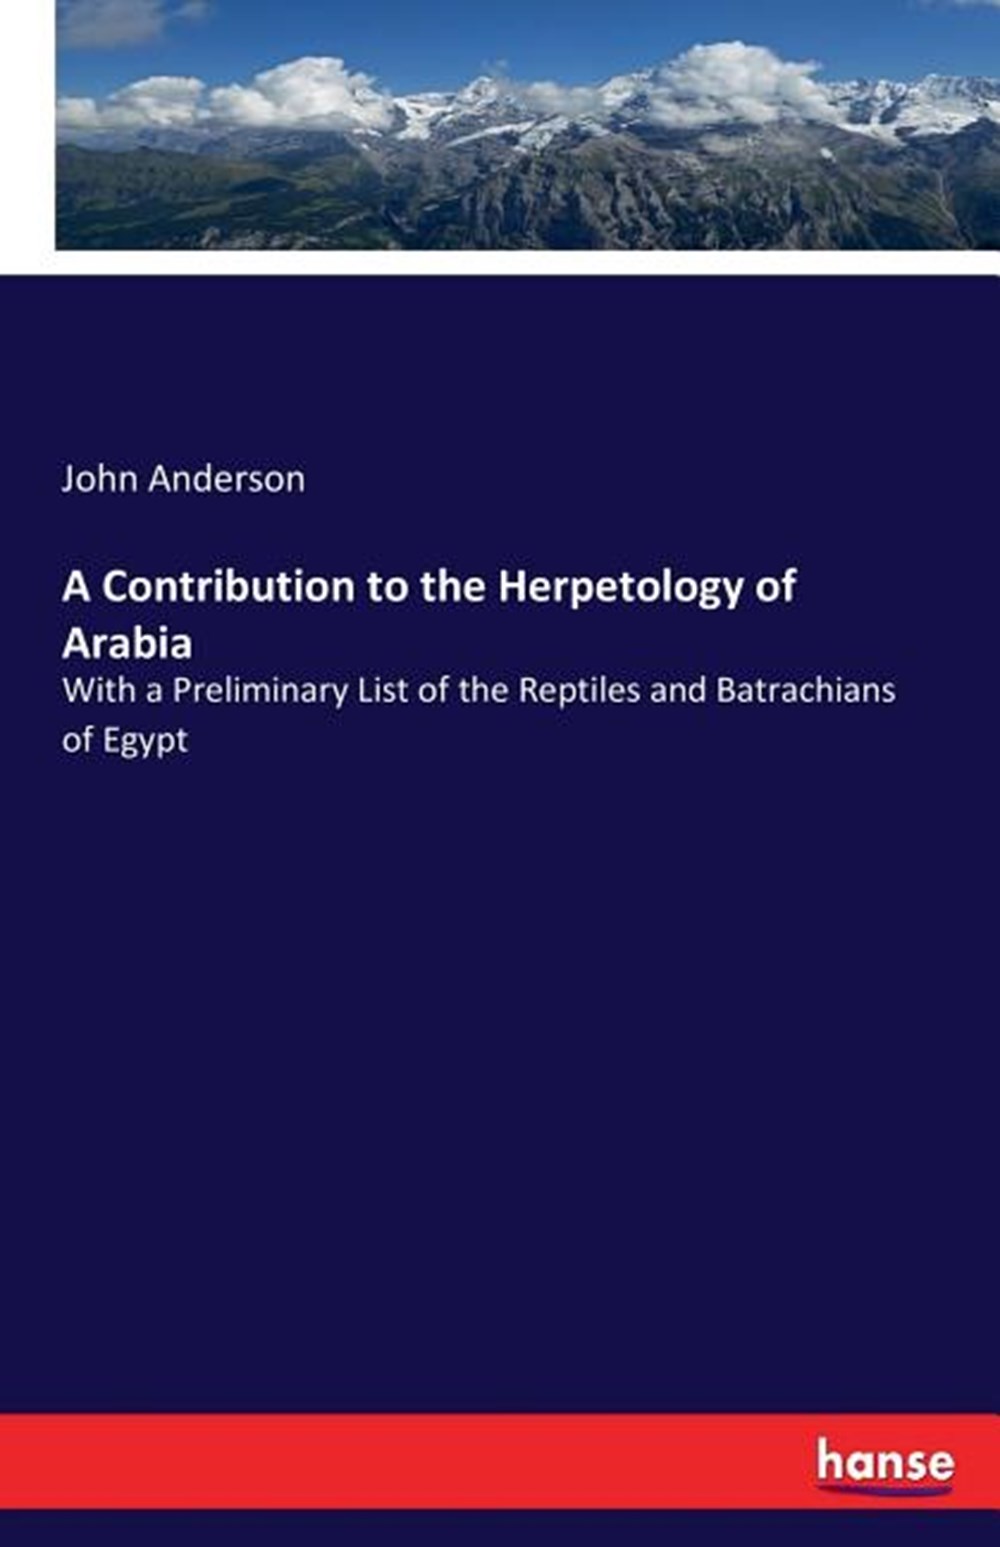 Contribution to the Herpetology of Arabia: With a Preliminary List of the Reptiles and Batrachians o